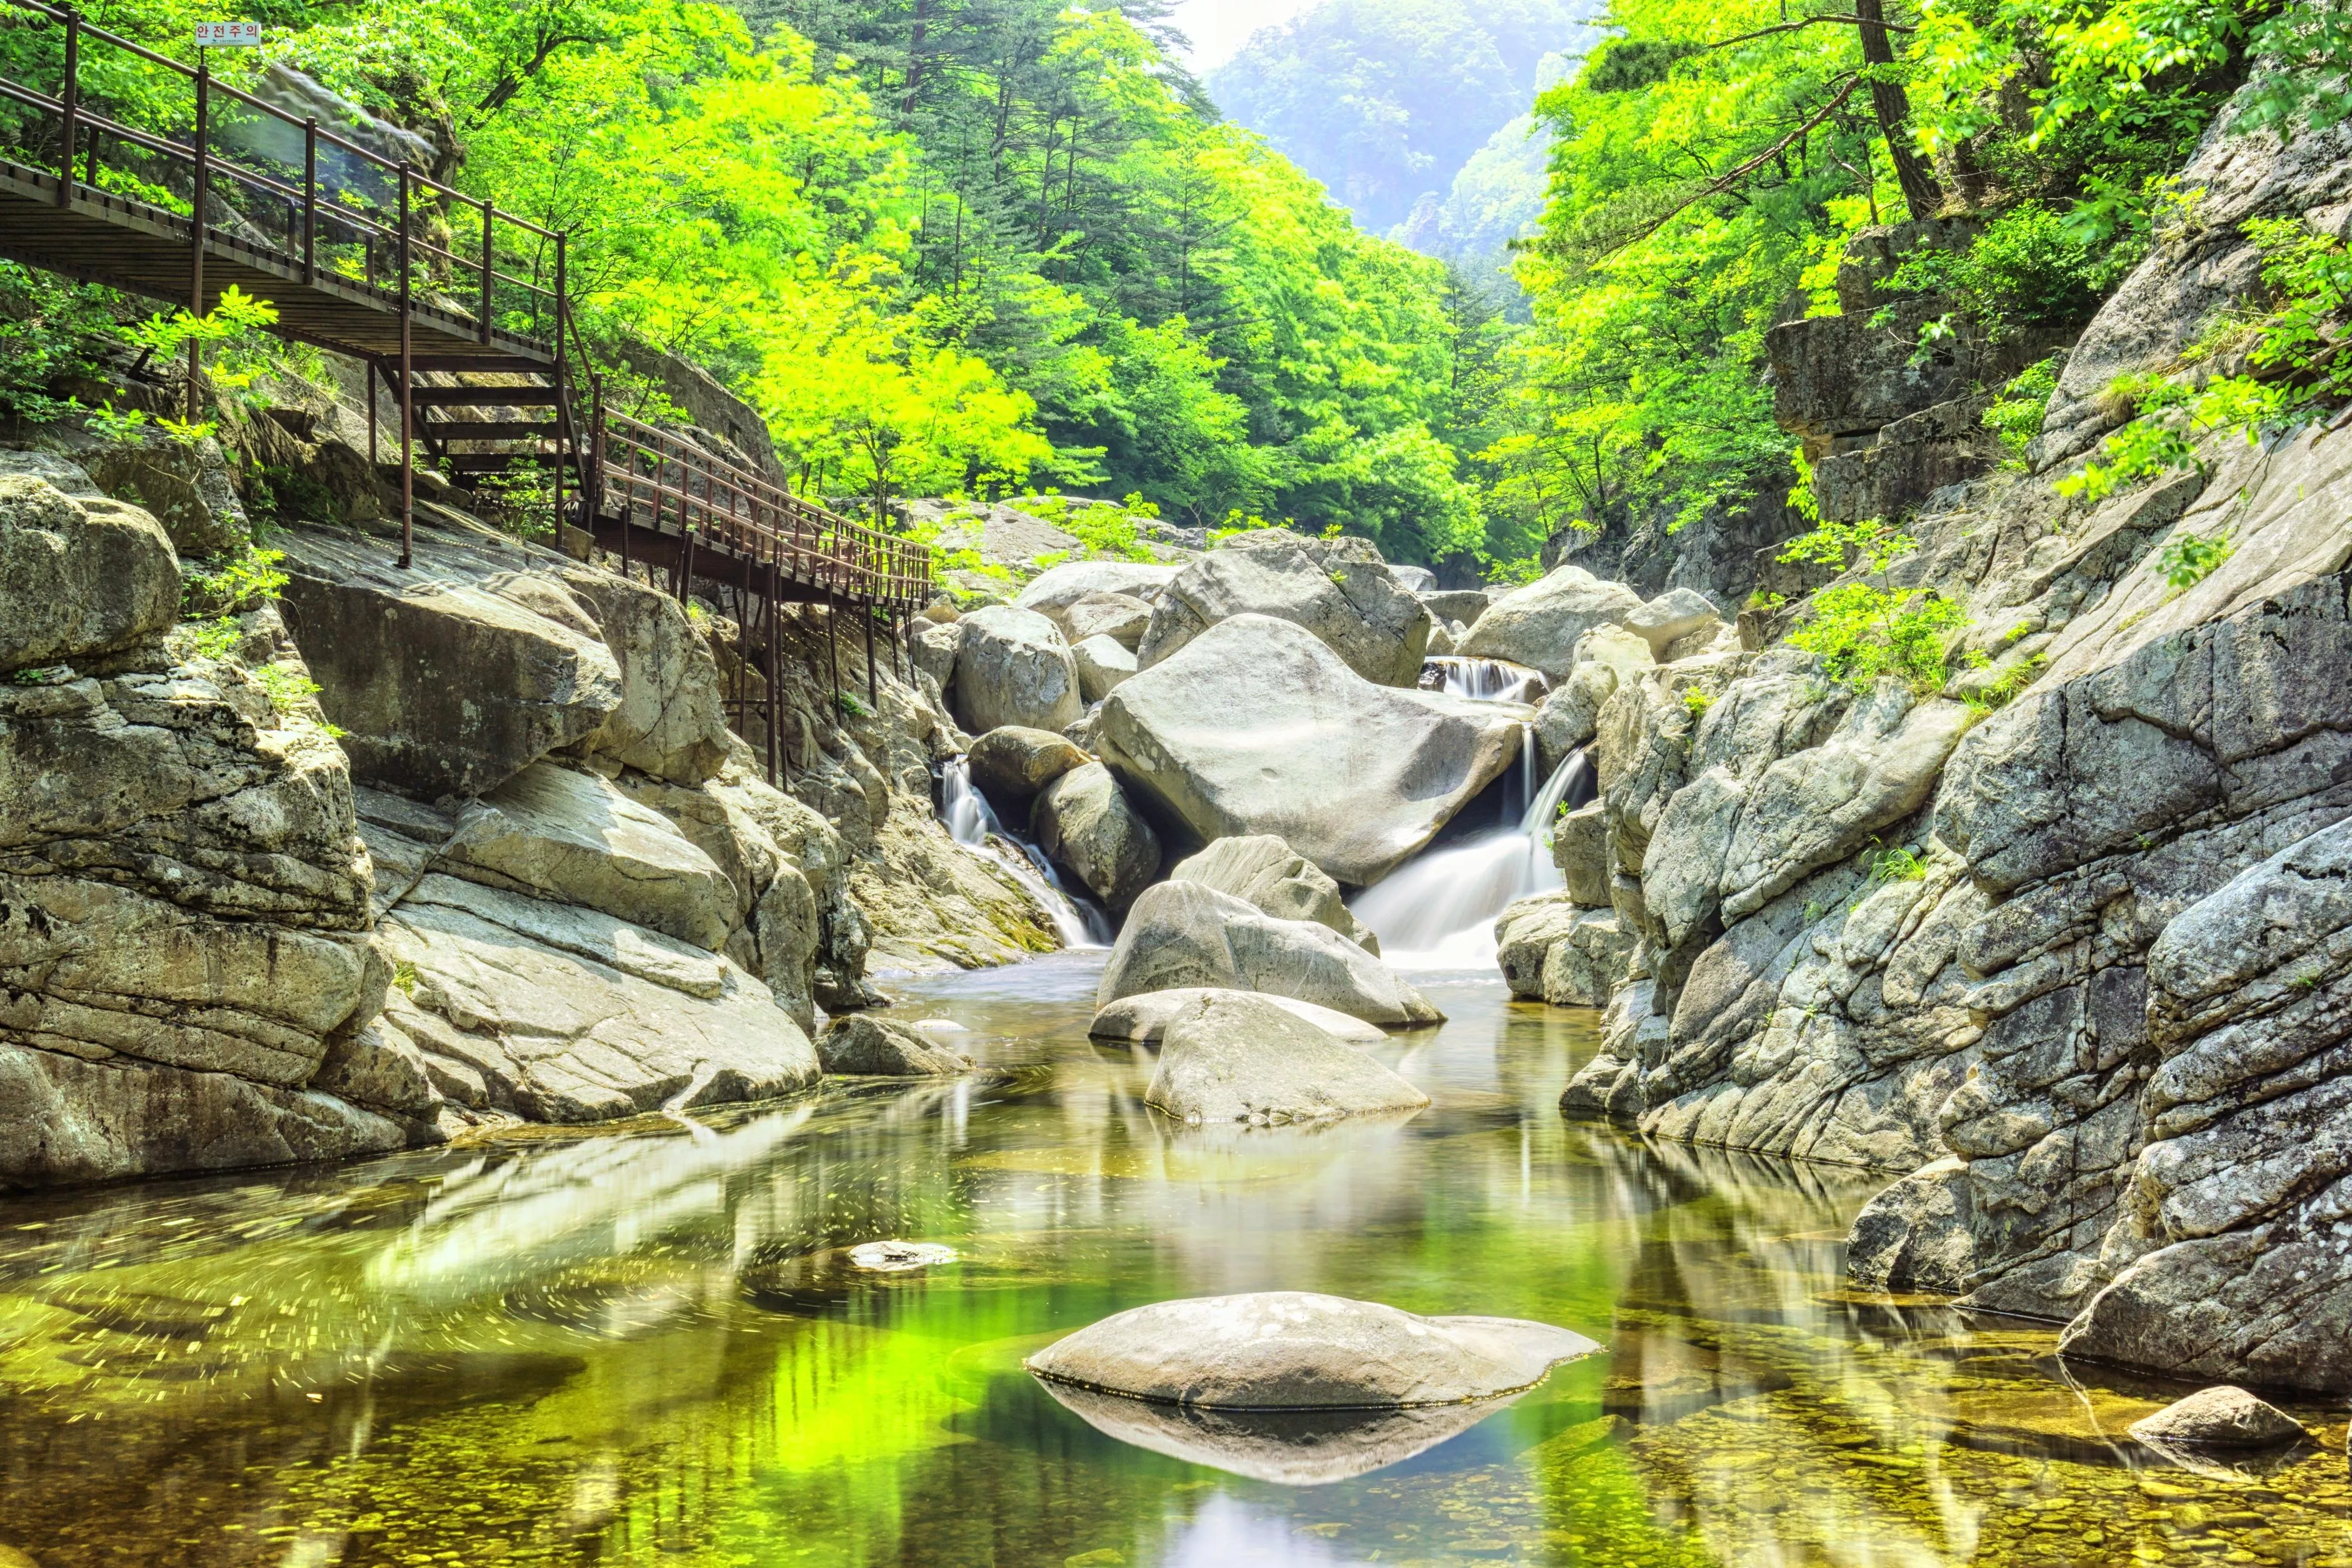 Odaesan National Park in South Korea, East Asia | Parks - Rated 3.5